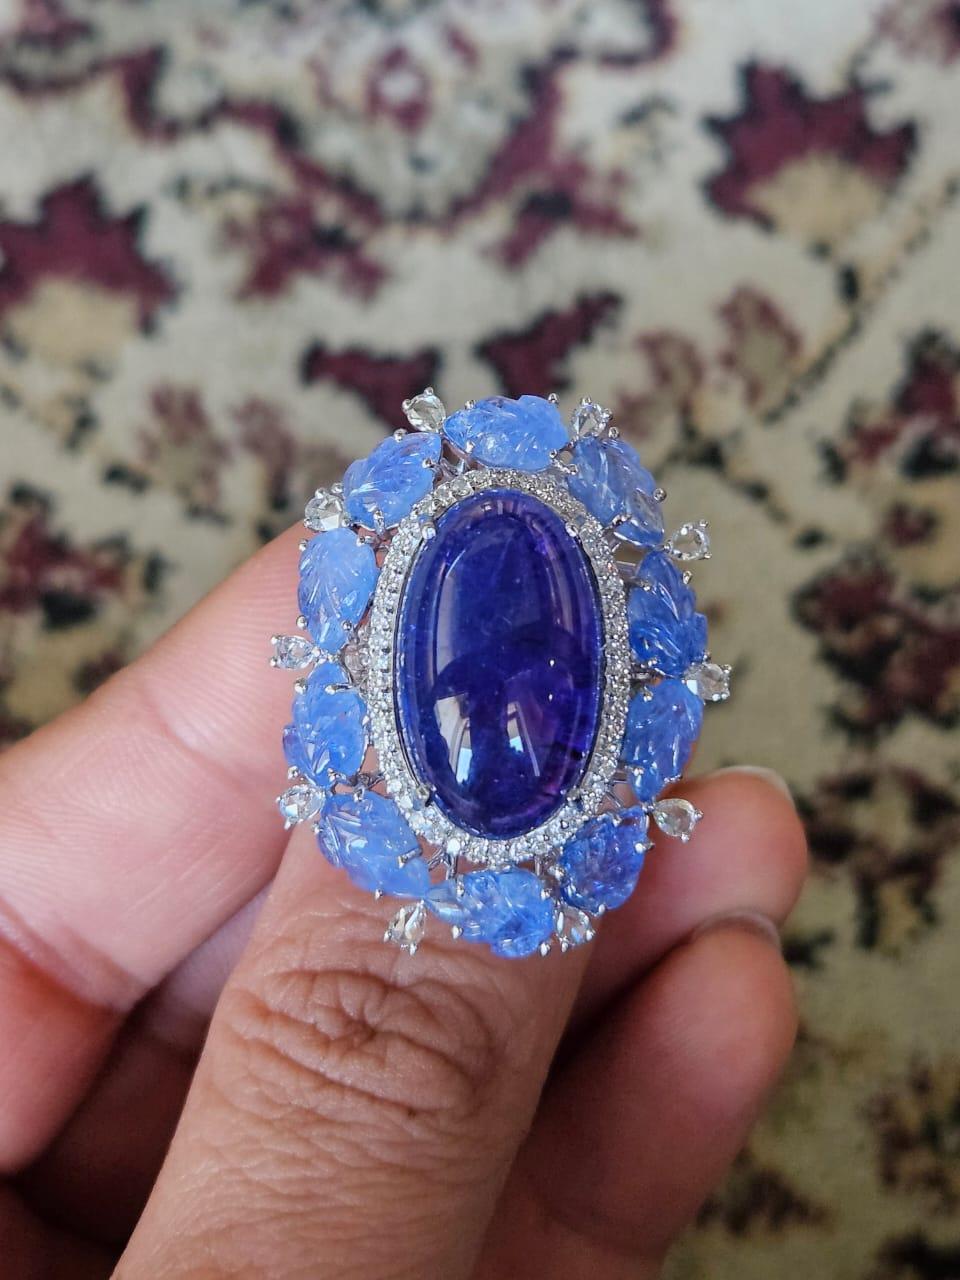 A very beautiful and gorgeous, Tanzanite & Blue Sapphire Cocktail Ring set in 18K White Gold & Diamonds. The weight of the Tanzanite Cabochon is 20.95 carats. The Tanzanite is responsibly sourced from Tanzania. The weight of the carved Blue